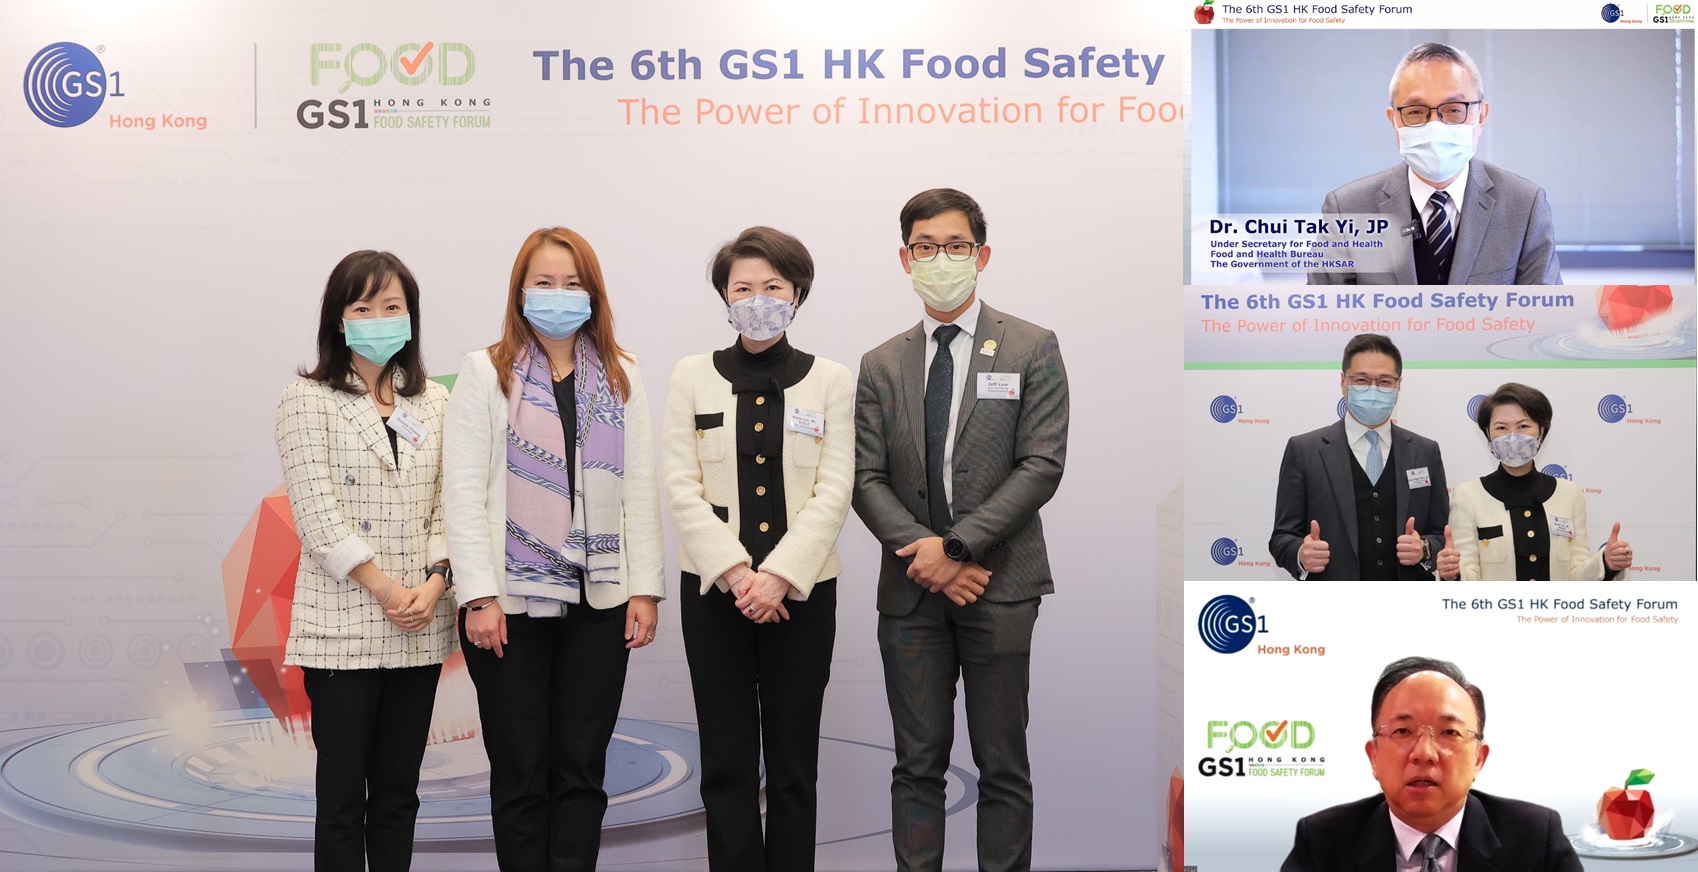 The 6th Food Safety Forum